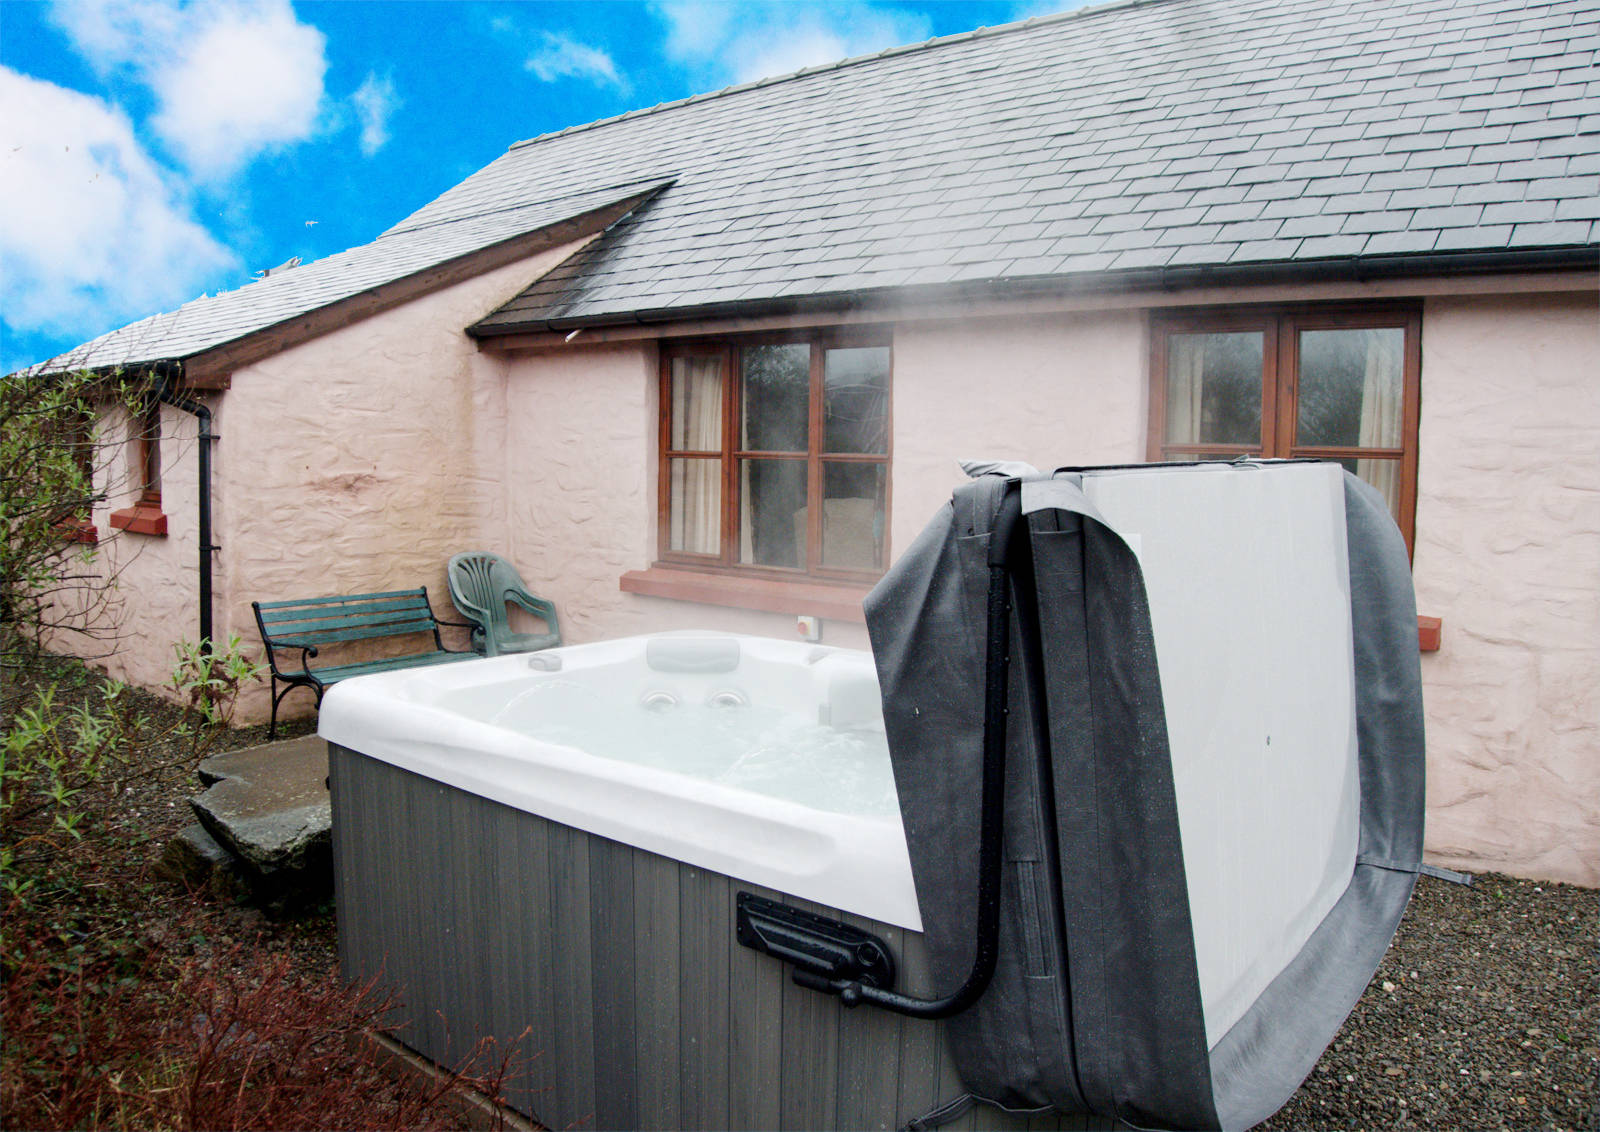 Disabled Holidays - Ty Coed - Canllefaes Ganol Cottages, Cardigan, Ceredigion, Wales